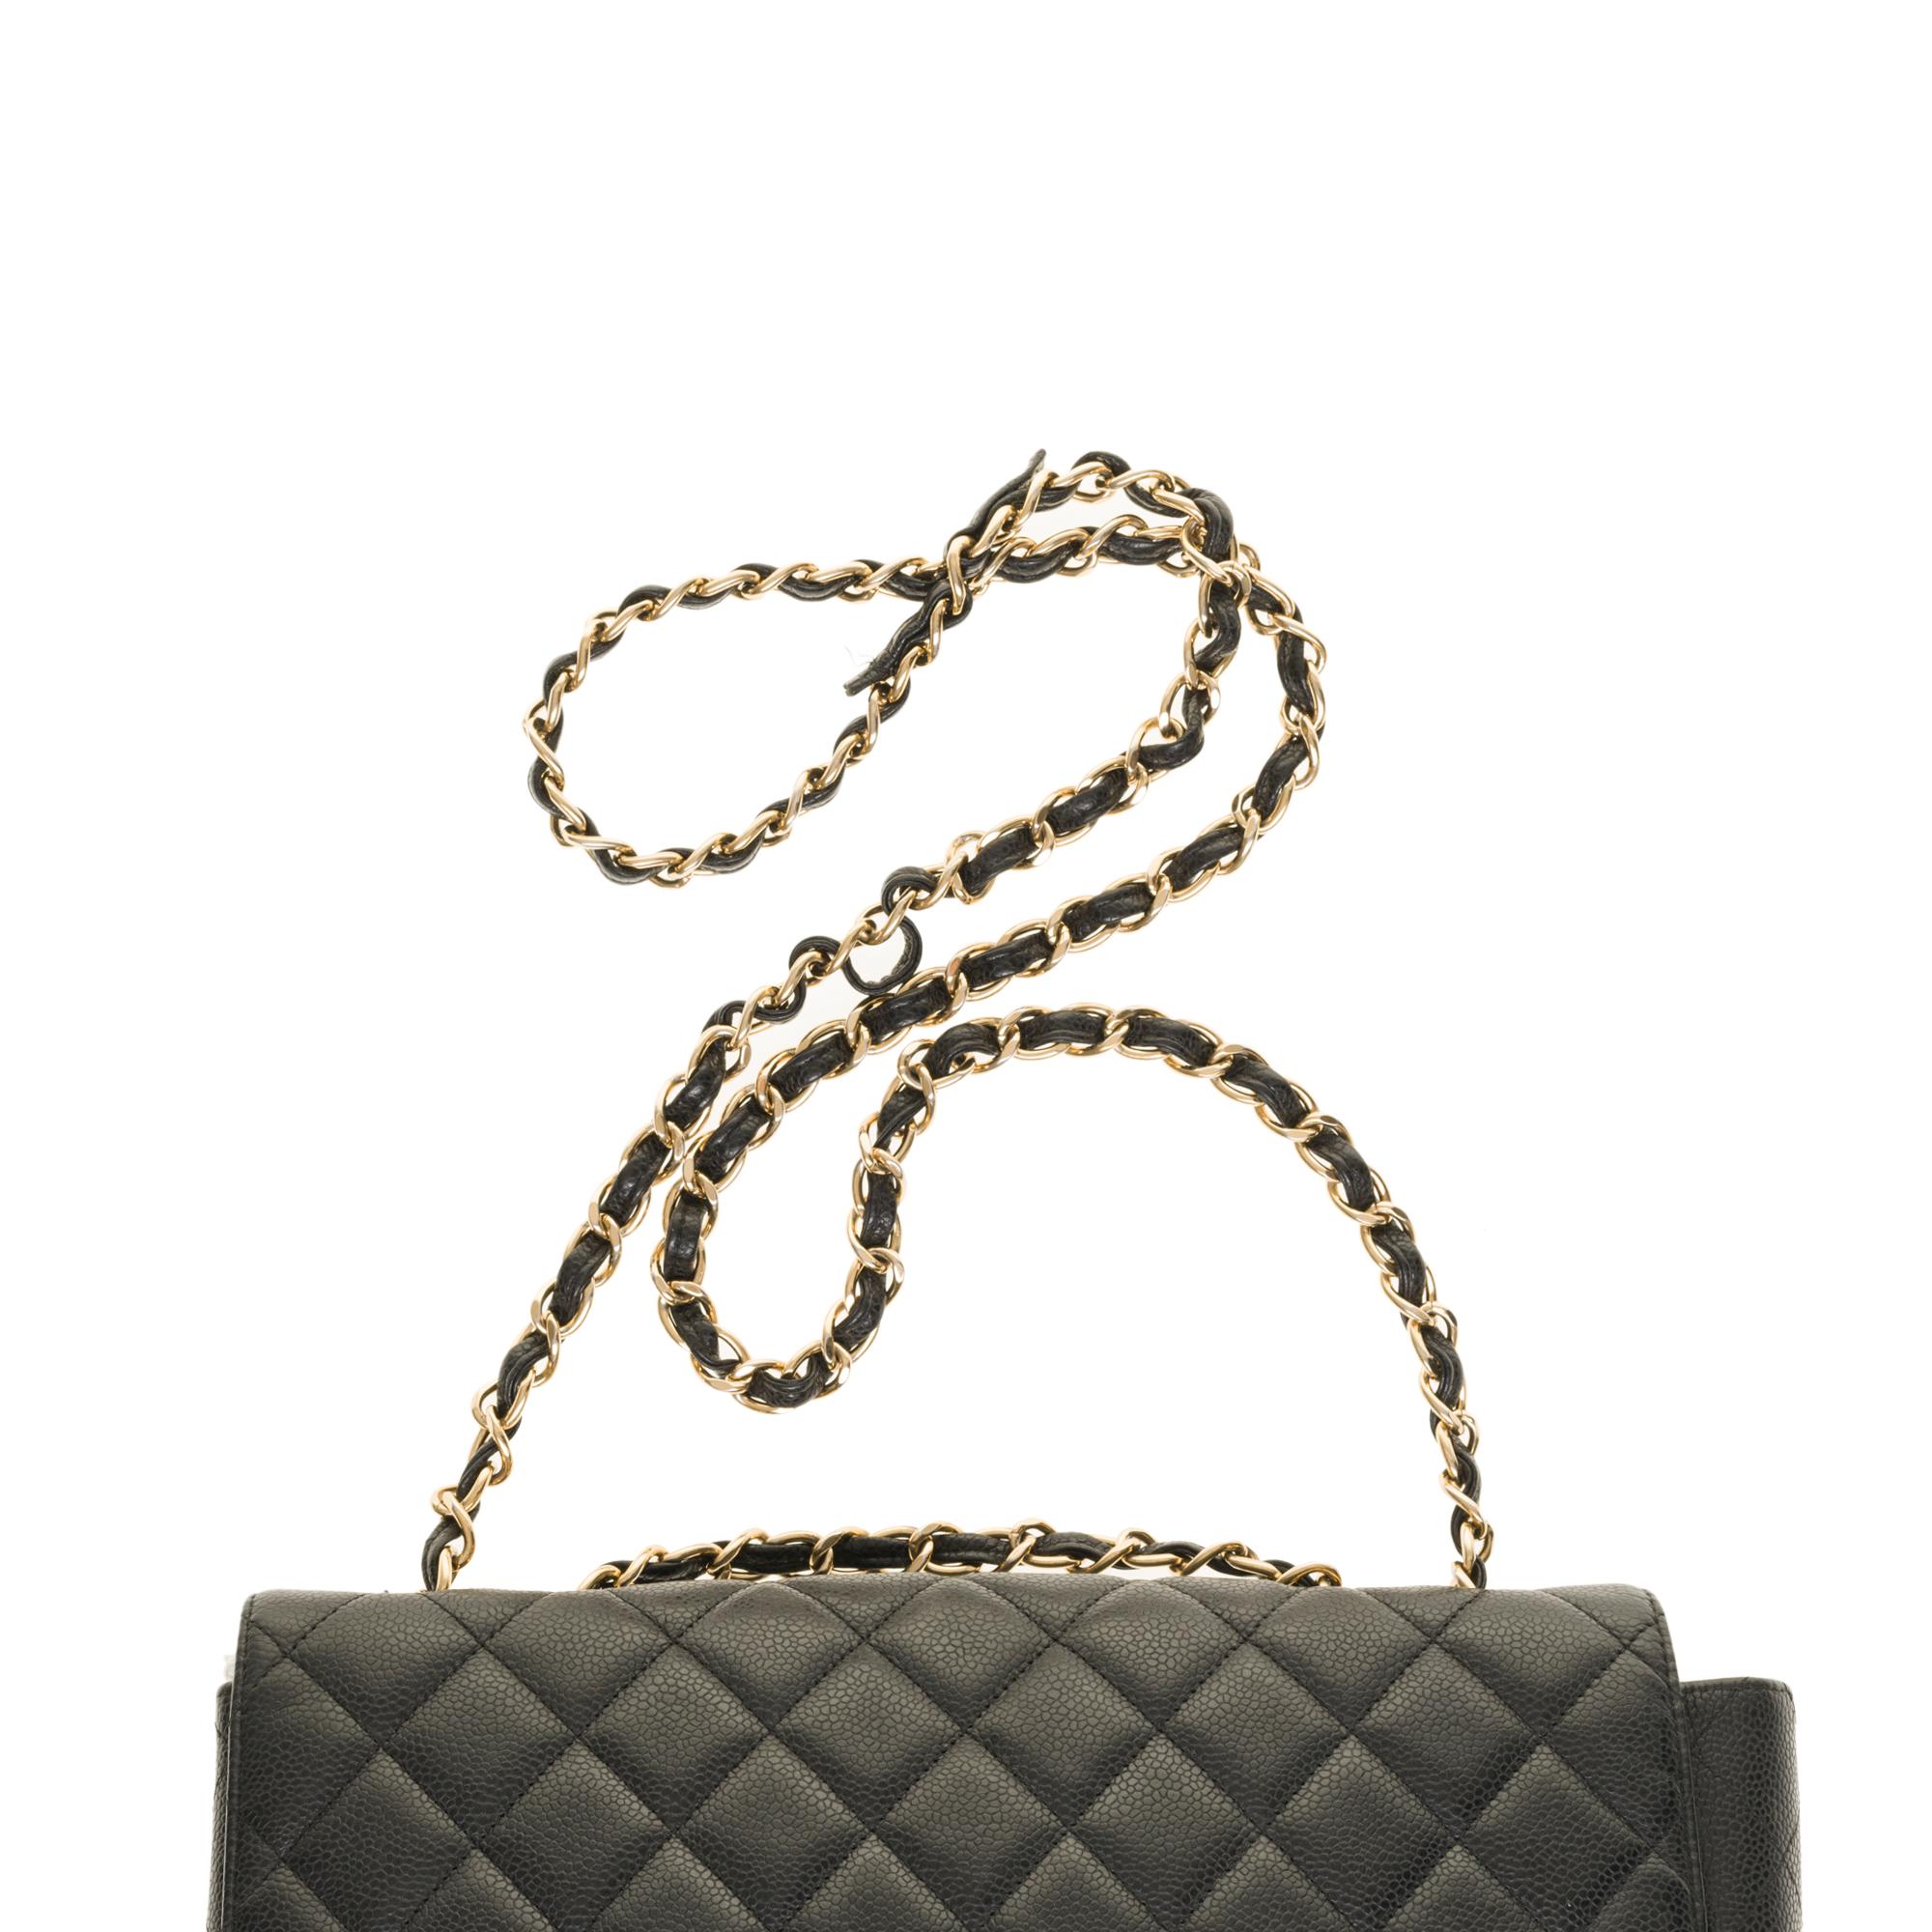 Chanel Timeless Jumbo shoulder bag in black quilted caviar leather, GHW 3